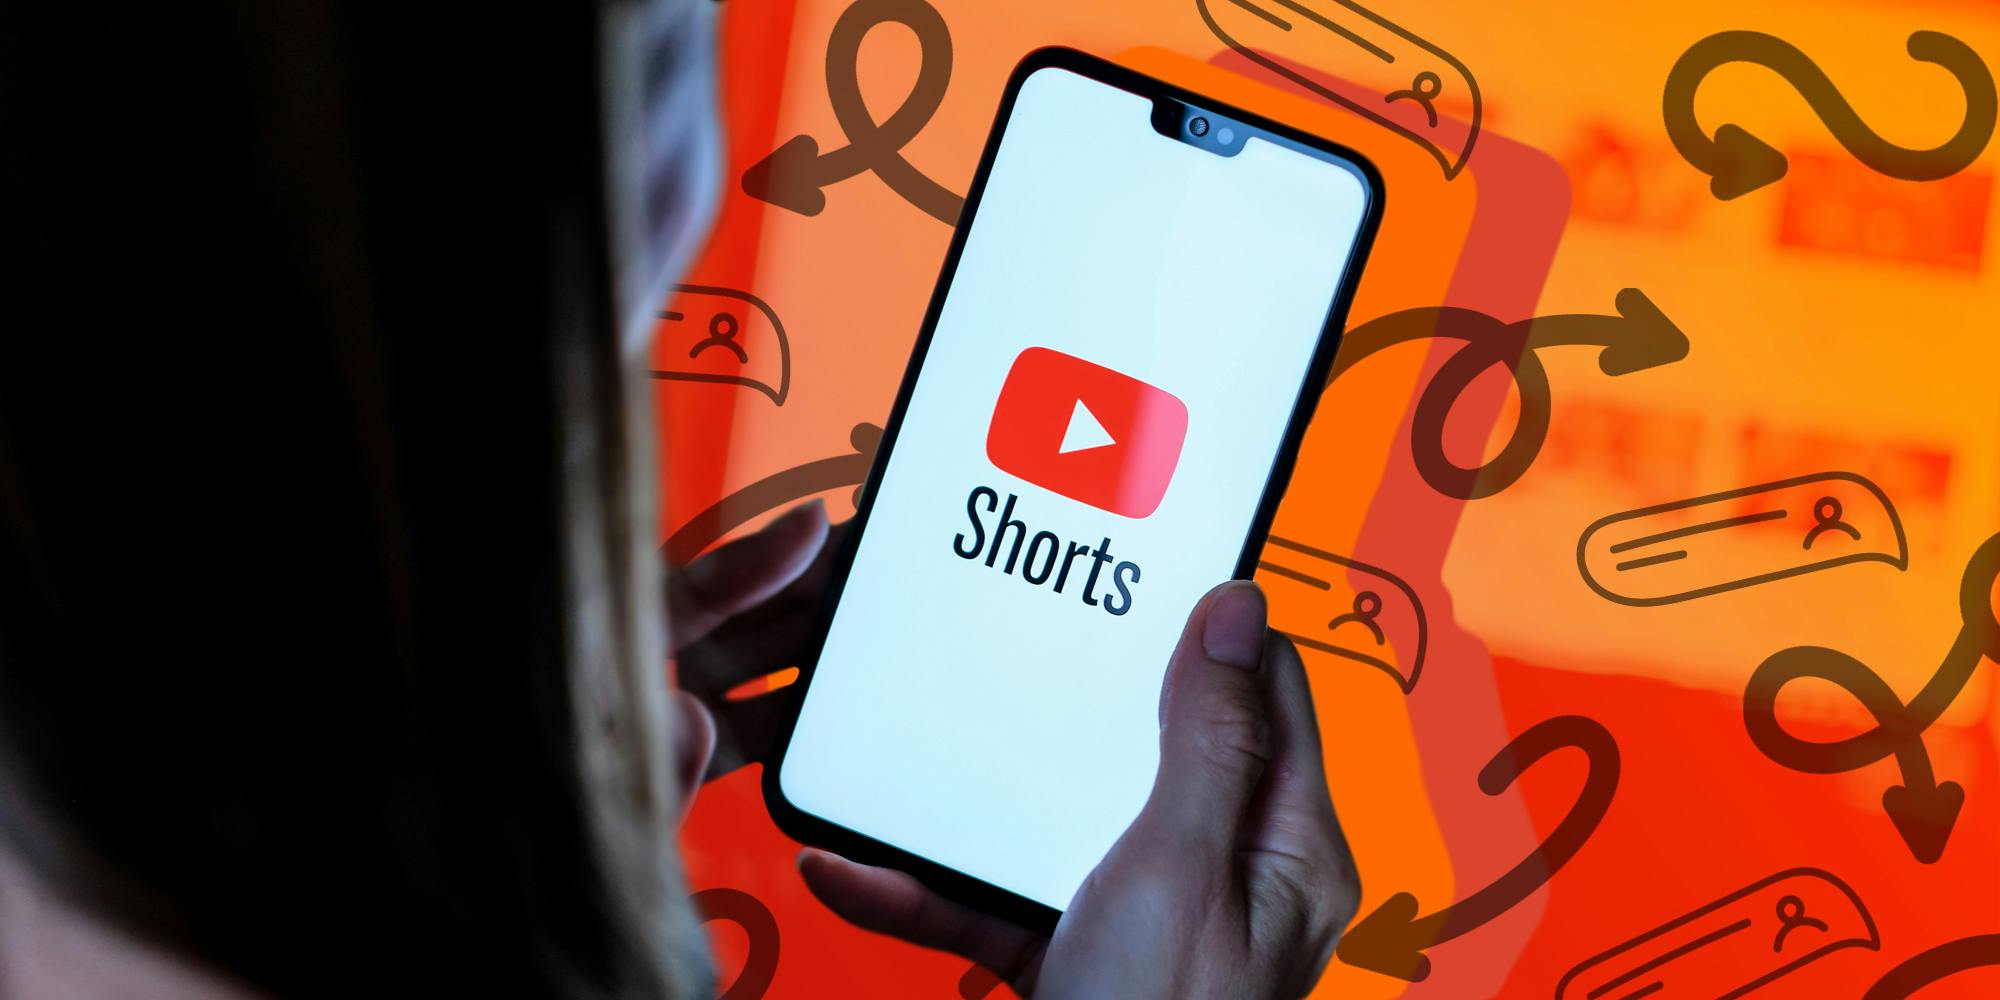 YouTube is Changing its External Linking Policy For Shorts—Here’s What That Means for Creators